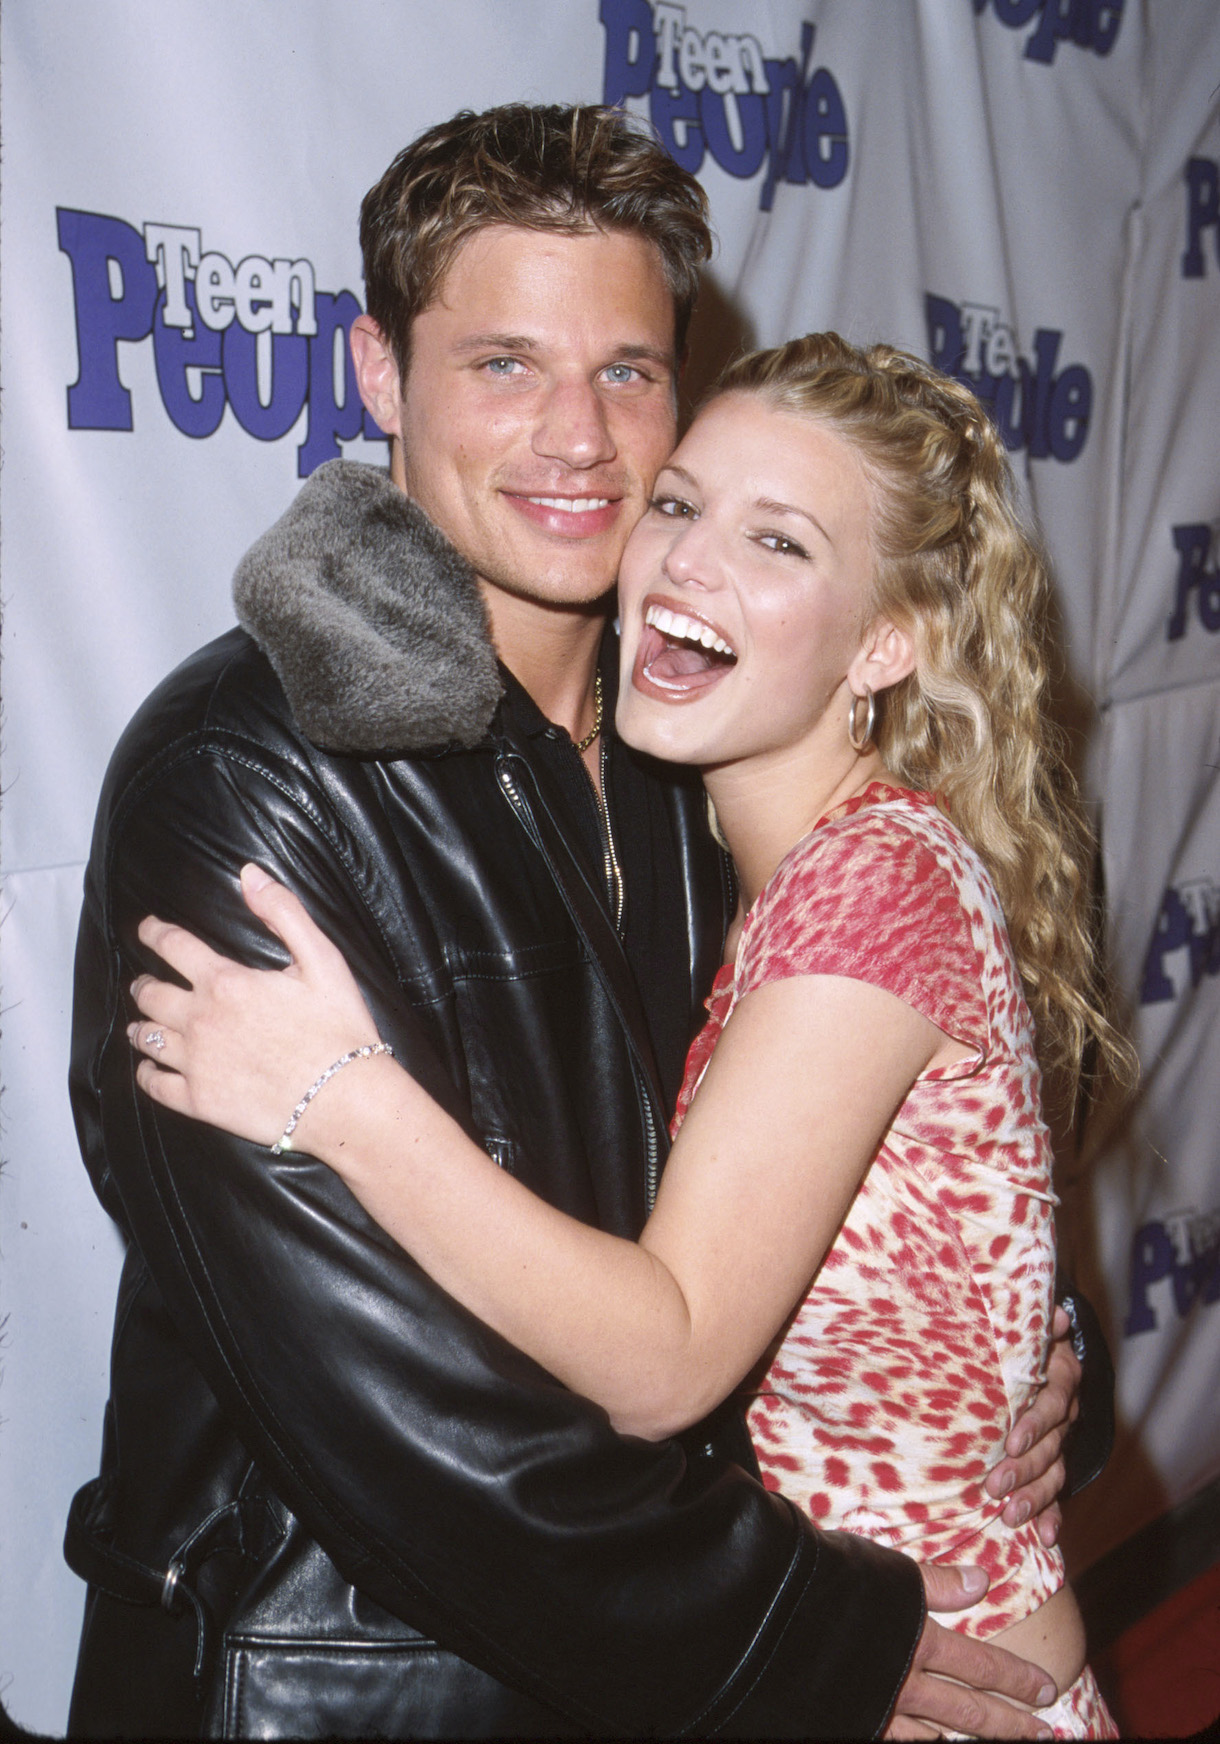 Jessica Simpson & Nick Lachey at the Vynyl Club in Hollywood, California